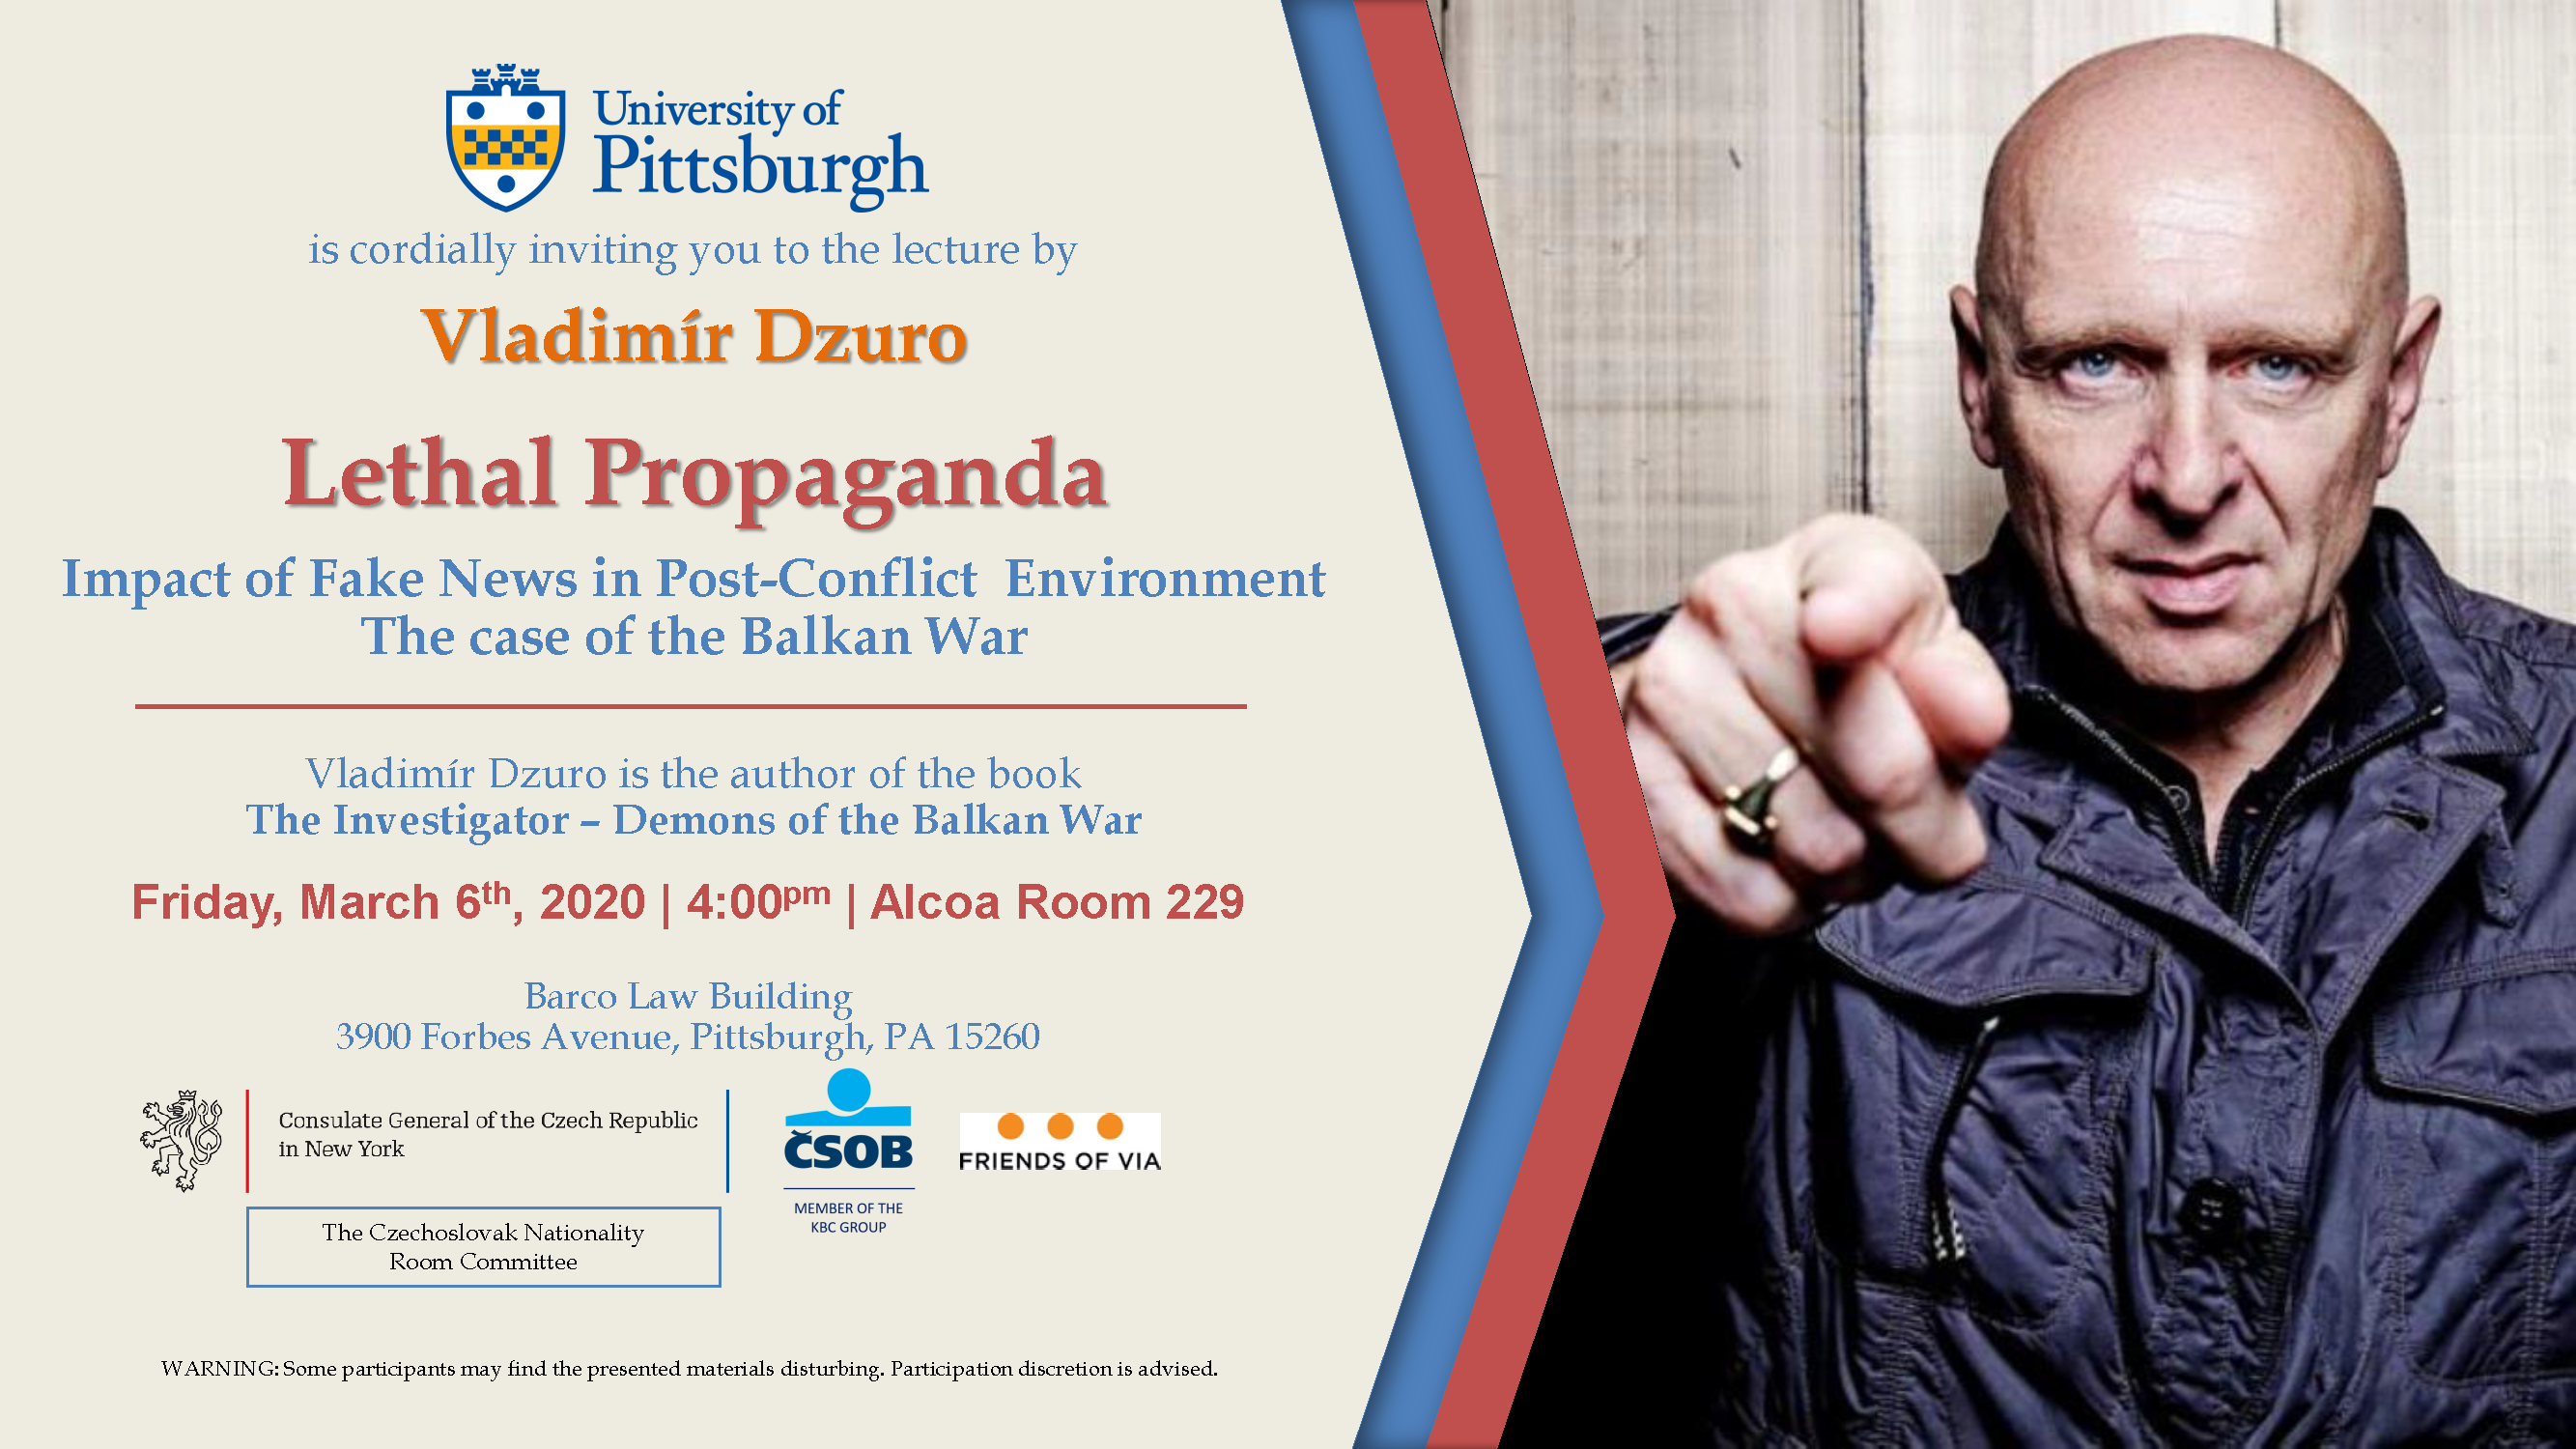 This flyer displays a picture of the guest lecturer, Vladimir Dzuro, and restates the event details listed as text on the events page. 